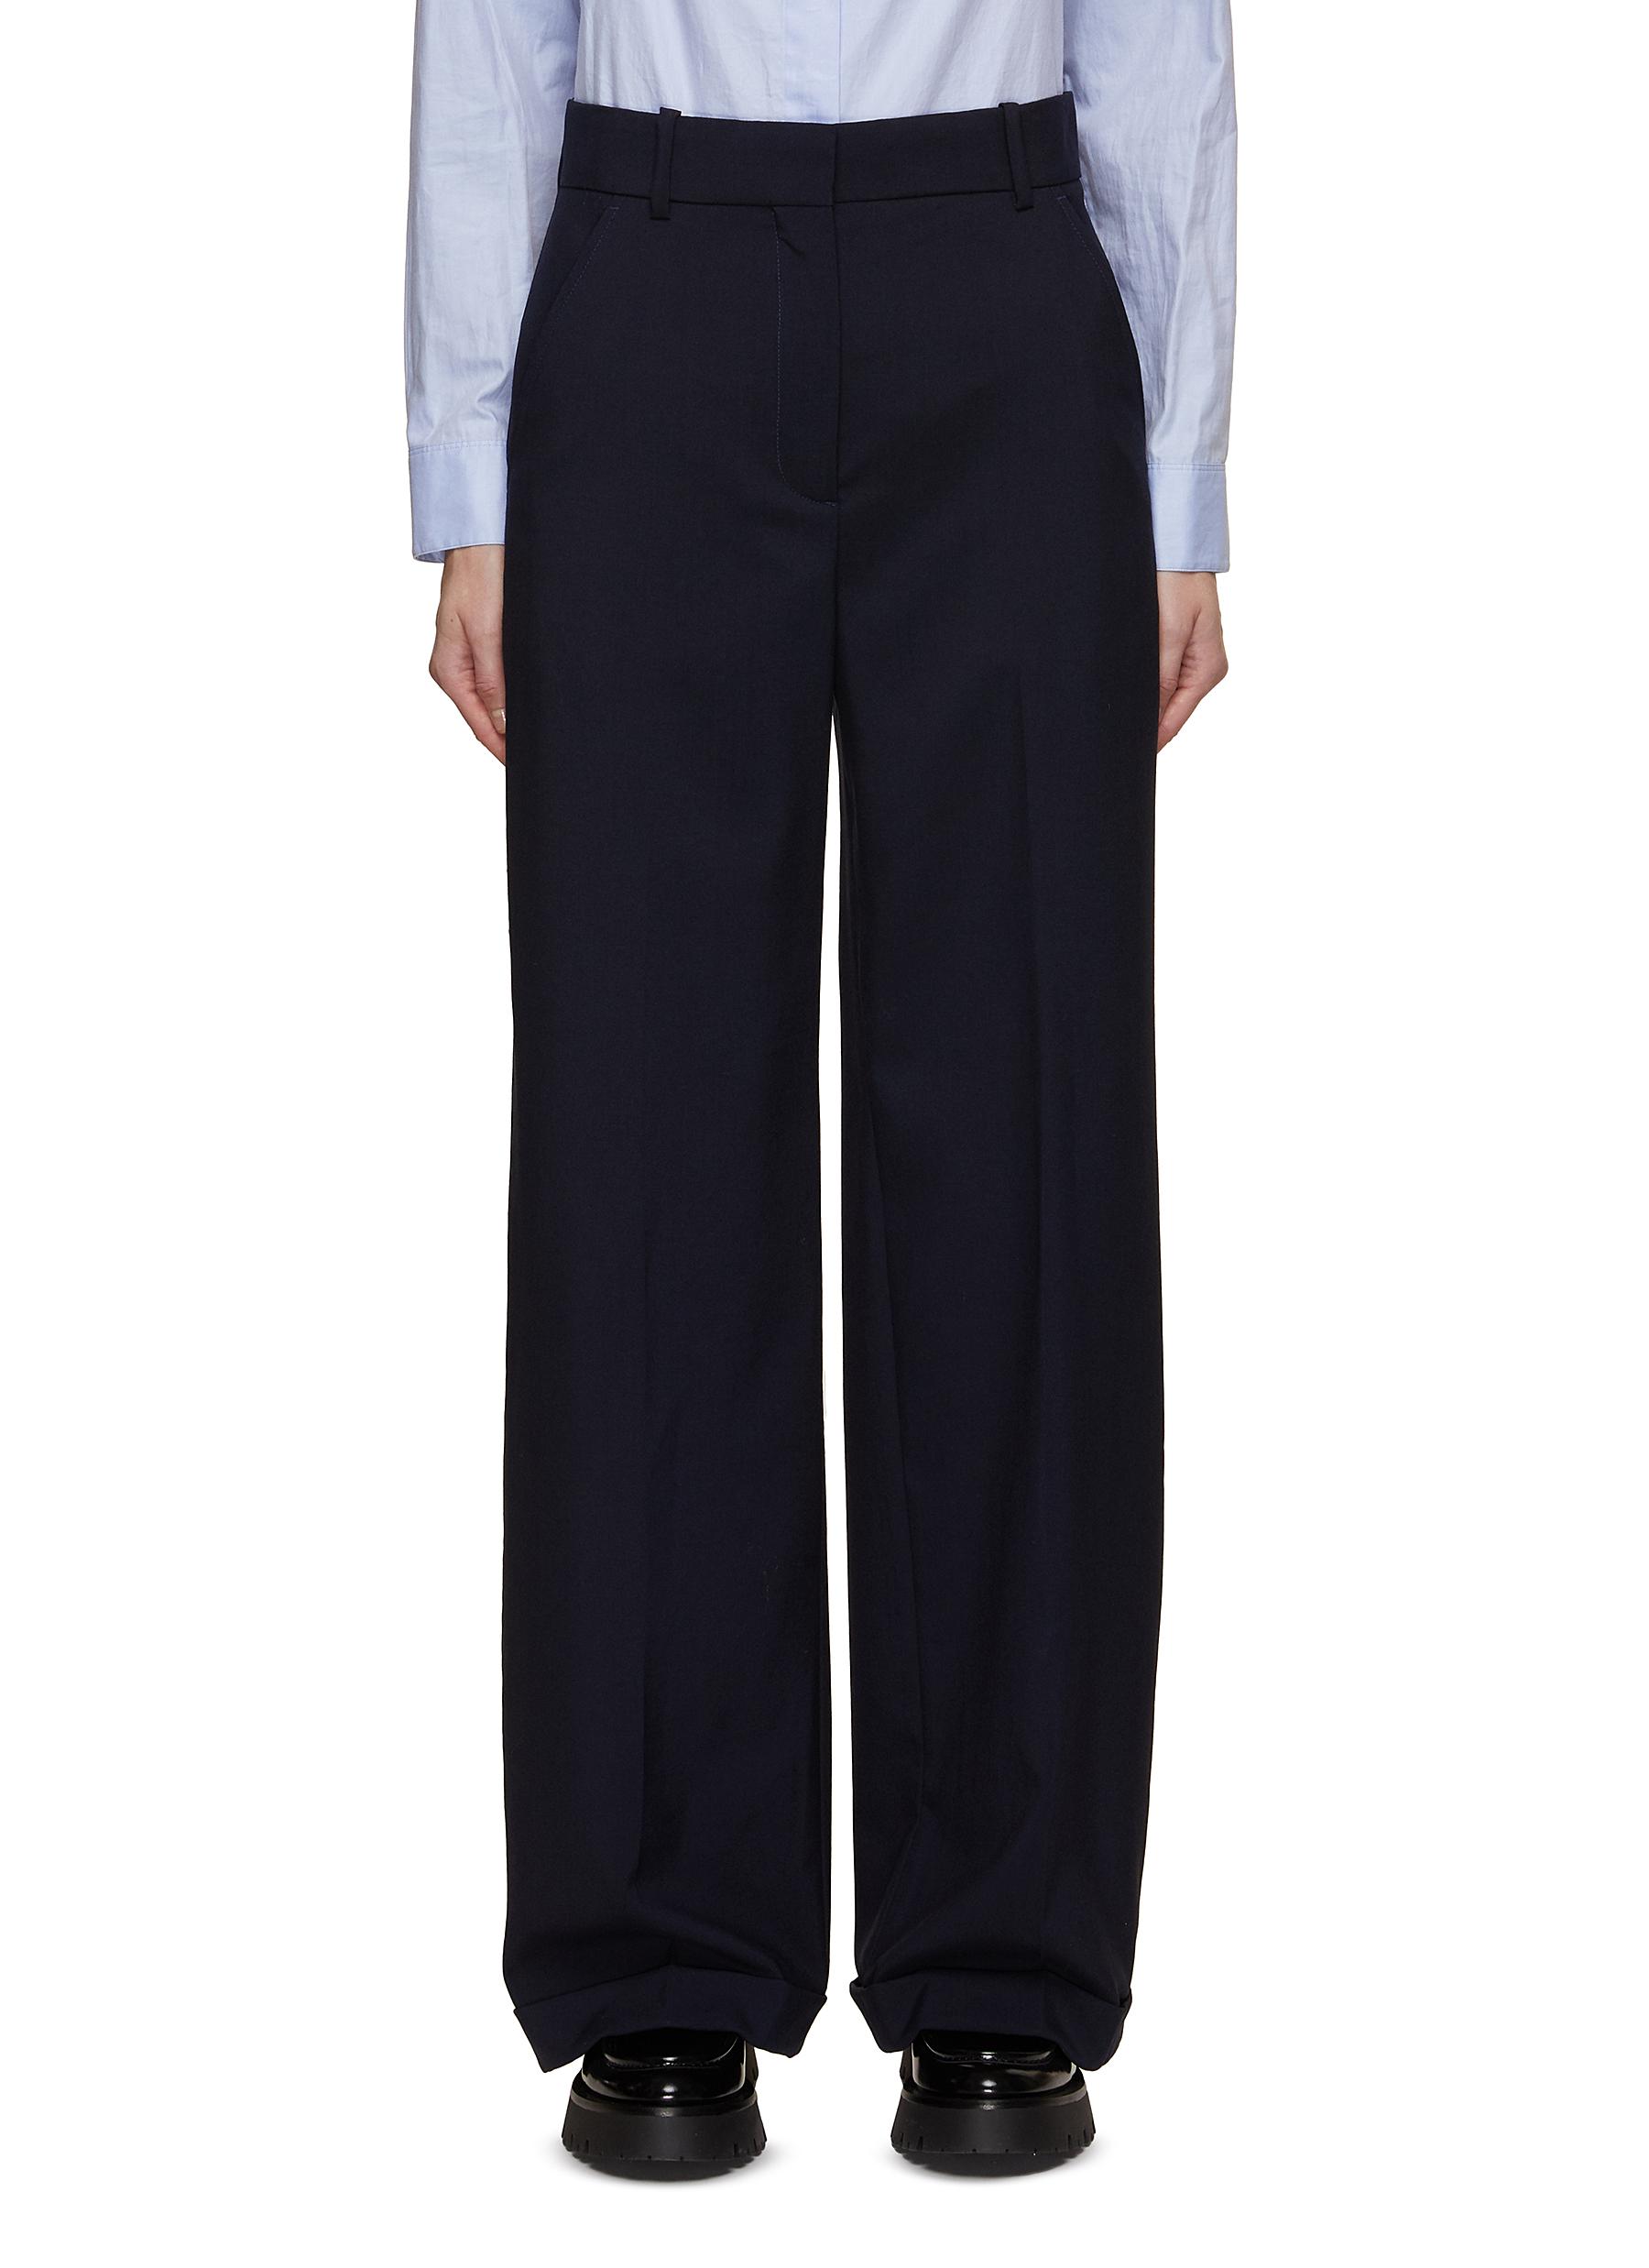 Solid Pocket Tailored Pants for Women